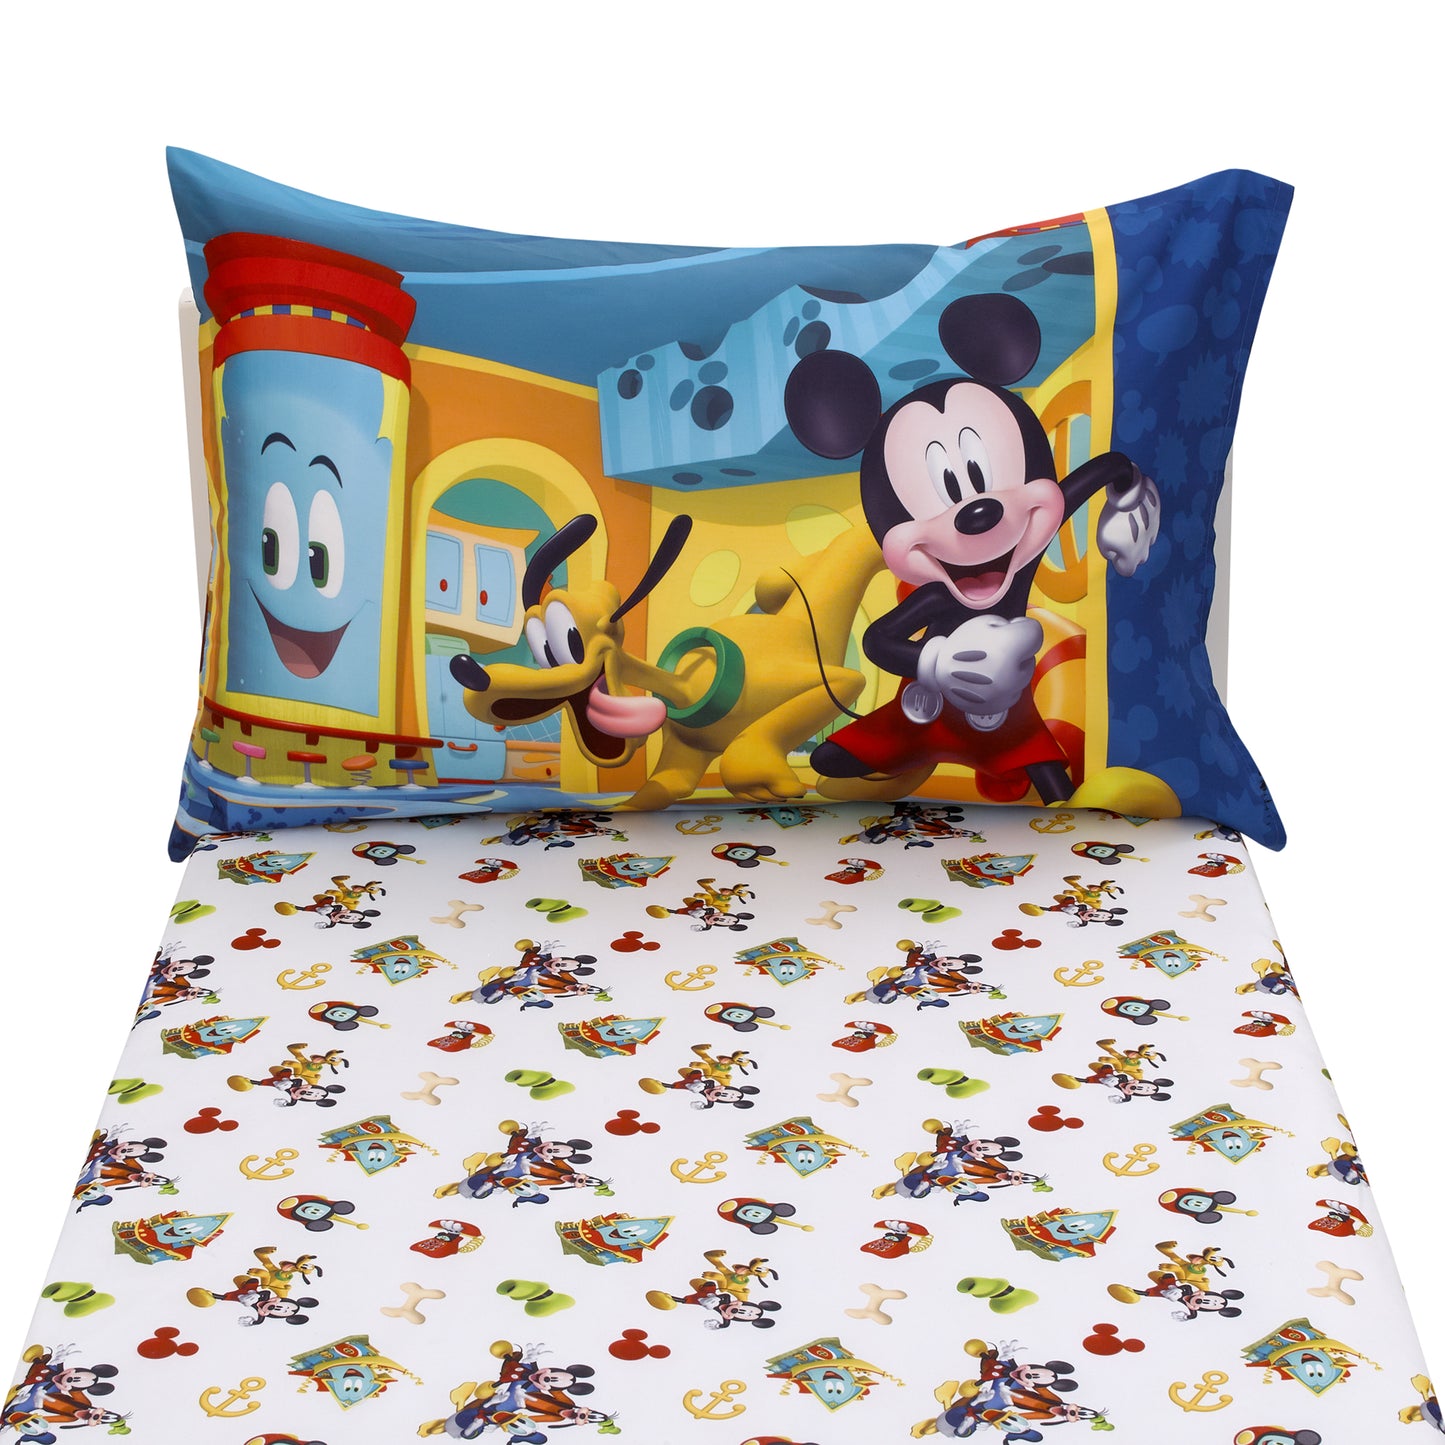 Disney Mickey Mouse Funhouse Crew Blue, Red, Yellow, and White, Funny, Donald Duck, Goofy and Pluto 2 Piece Toddler Sheet Set - Fitted Bottom Sheet and Reversible Pillowcase